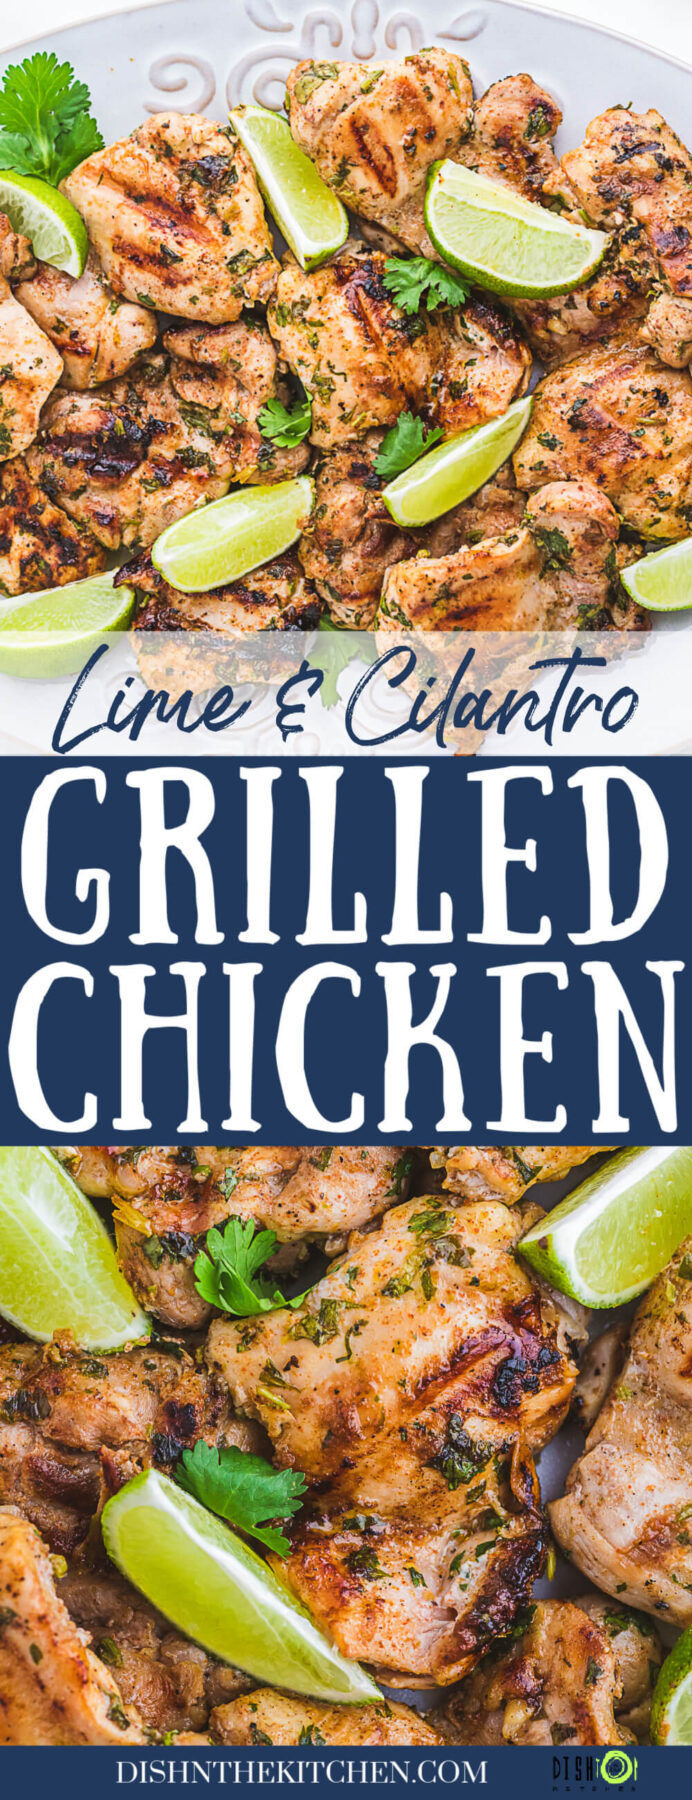 Pinterest image featuring a platter full of grilled chicken thighs topped with fresh cilantro and lime wedges